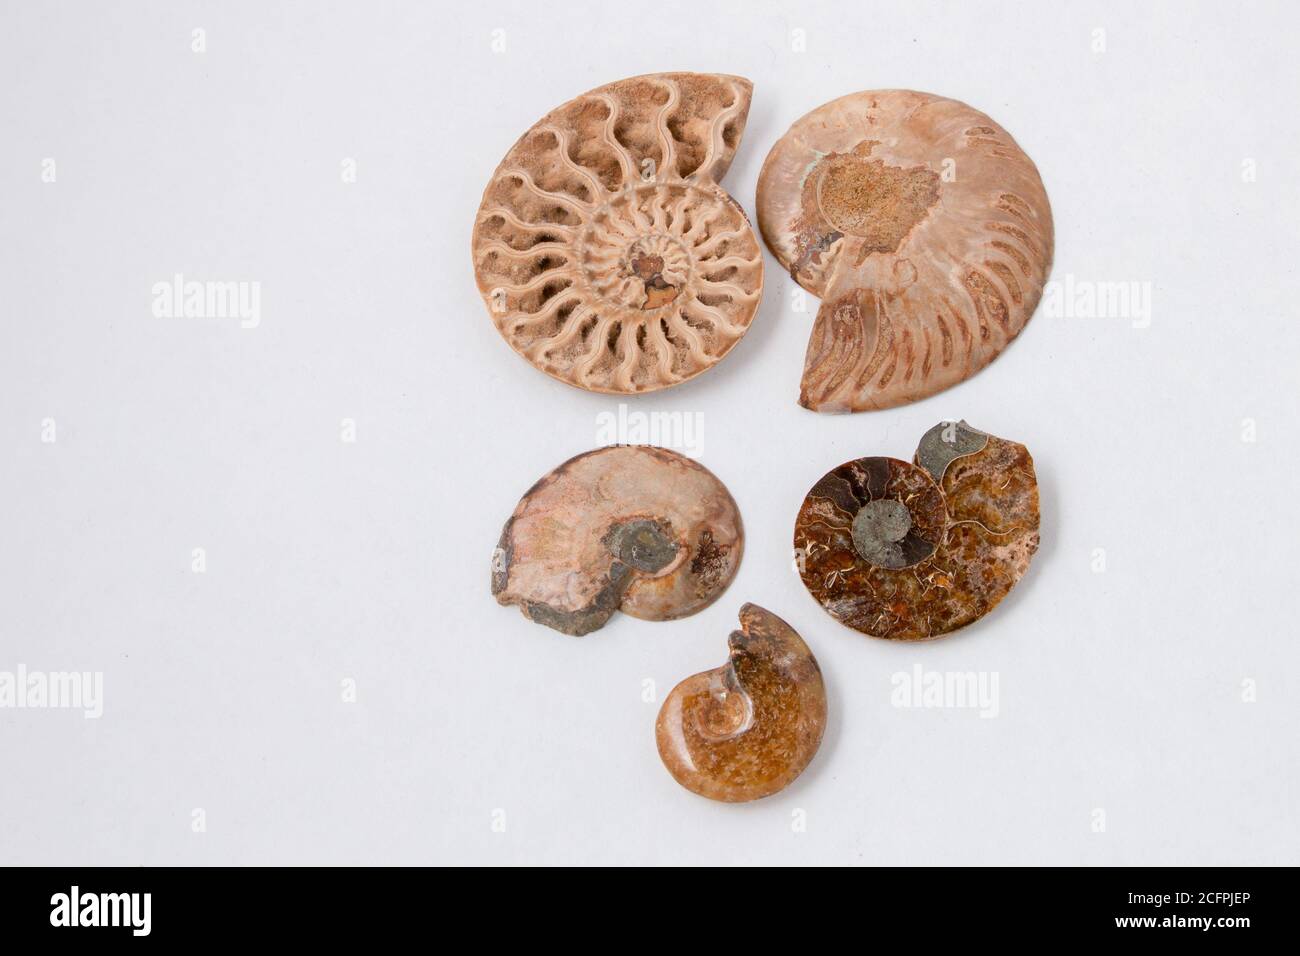 Ammonite fossil specimens of different sizes isolated on white Stock Photo